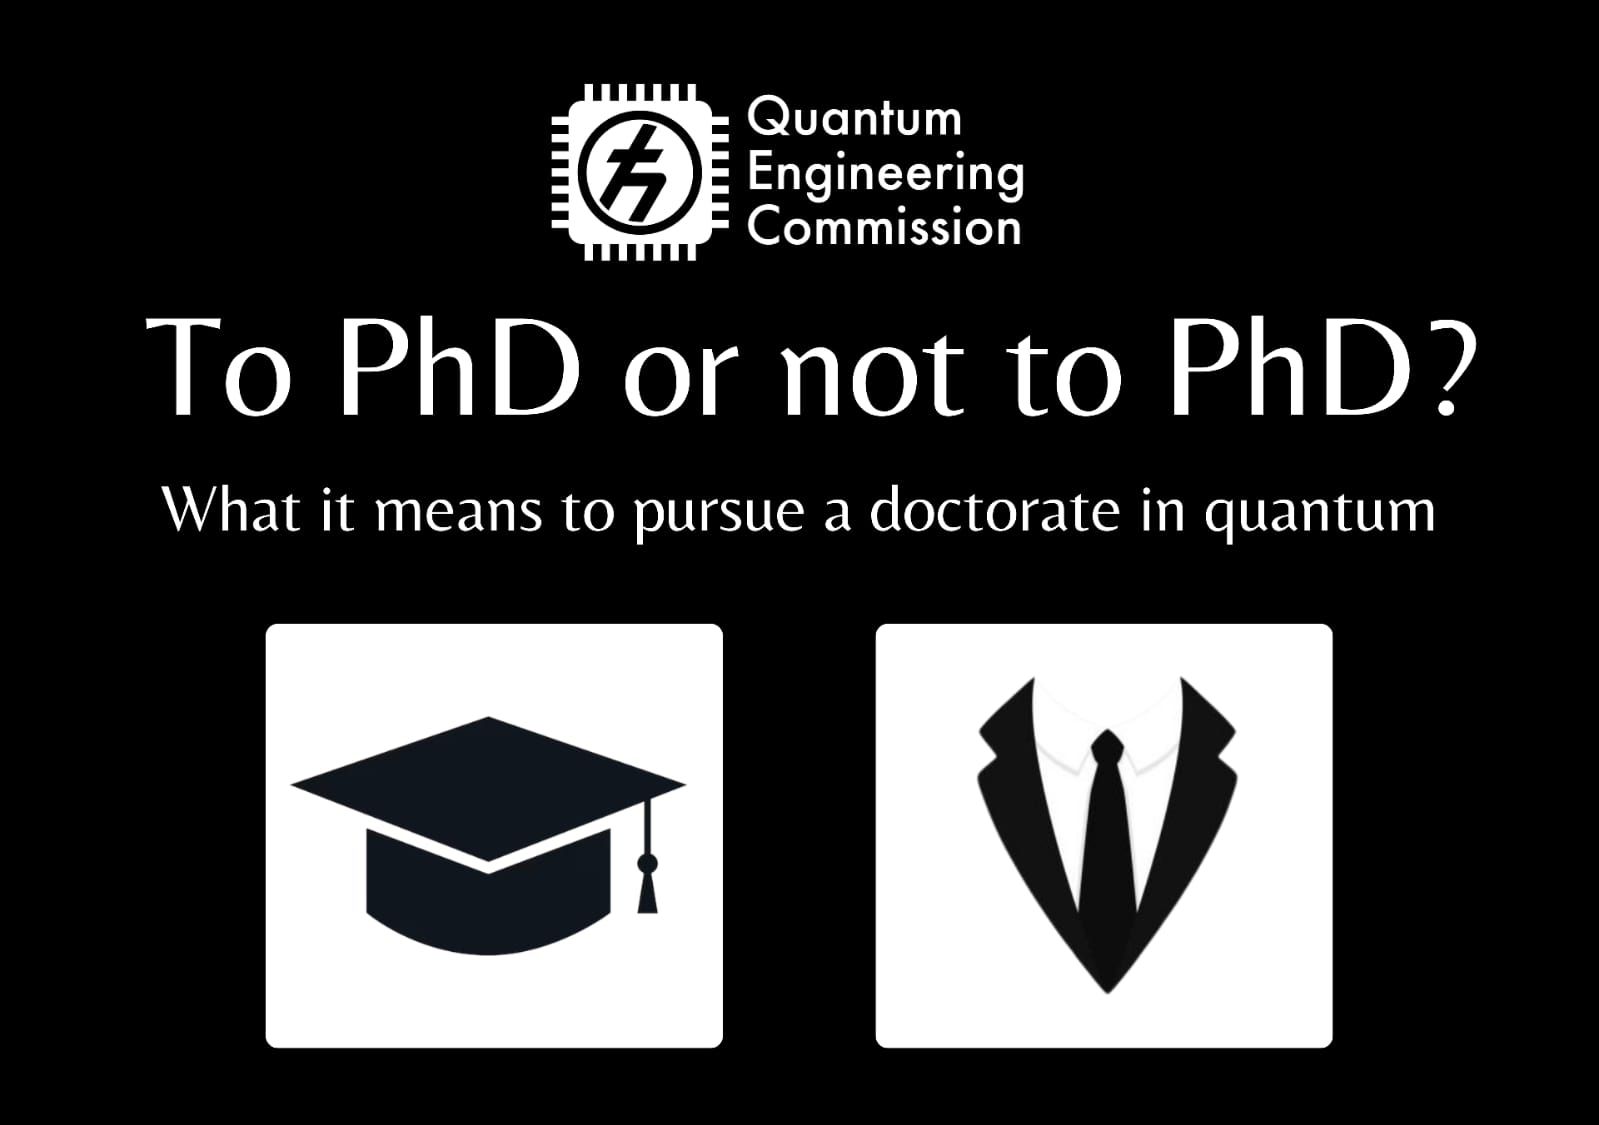 To PhD or not to PhD